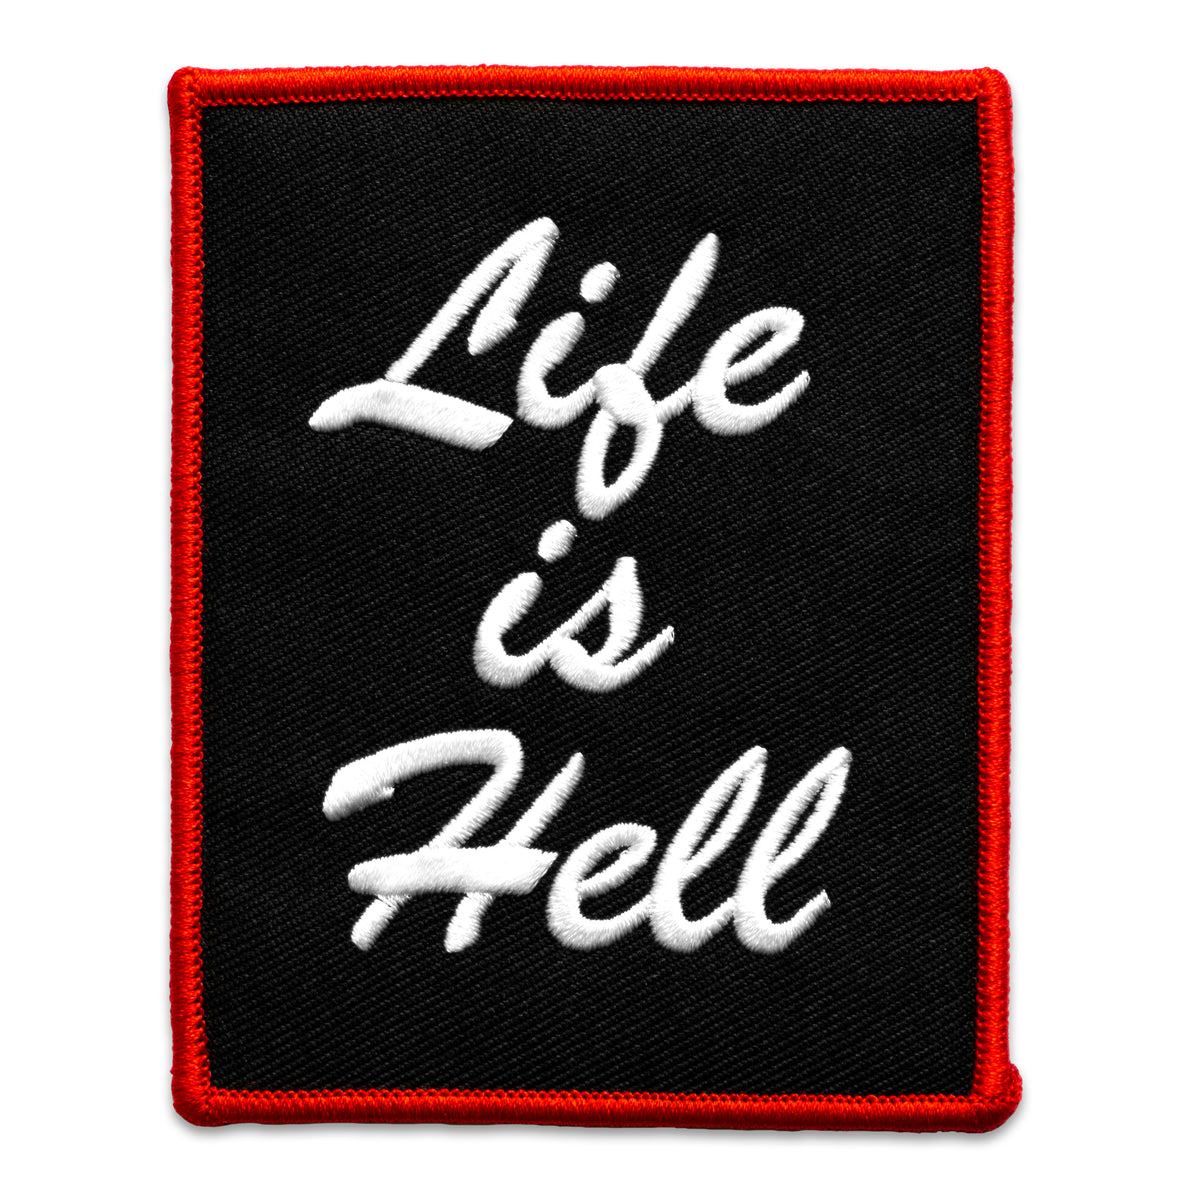 Official "NO FUN®" patch which reads "LIFE IS HELL". The patch features white, embroidered text with a red embroidered edge.